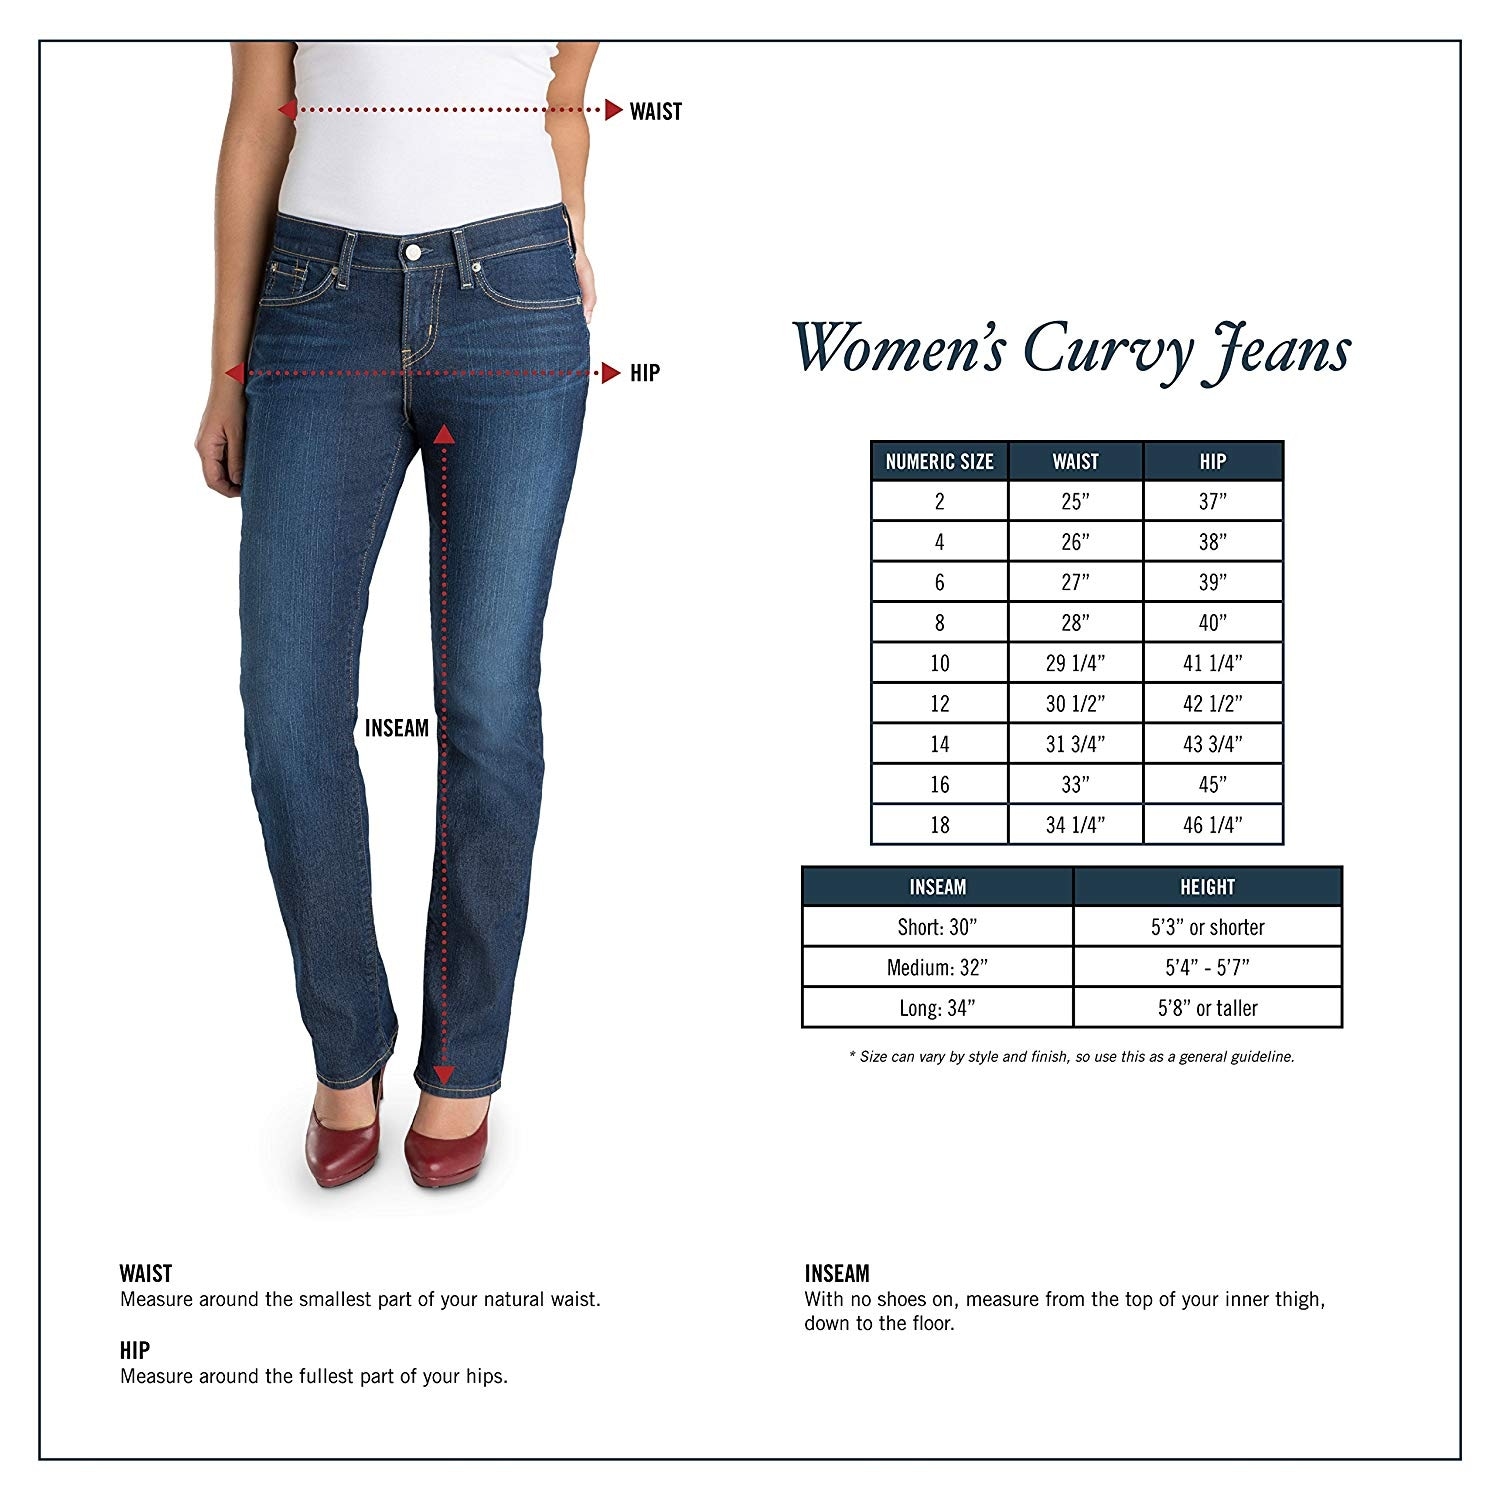 women's signature jeans by levi strauss